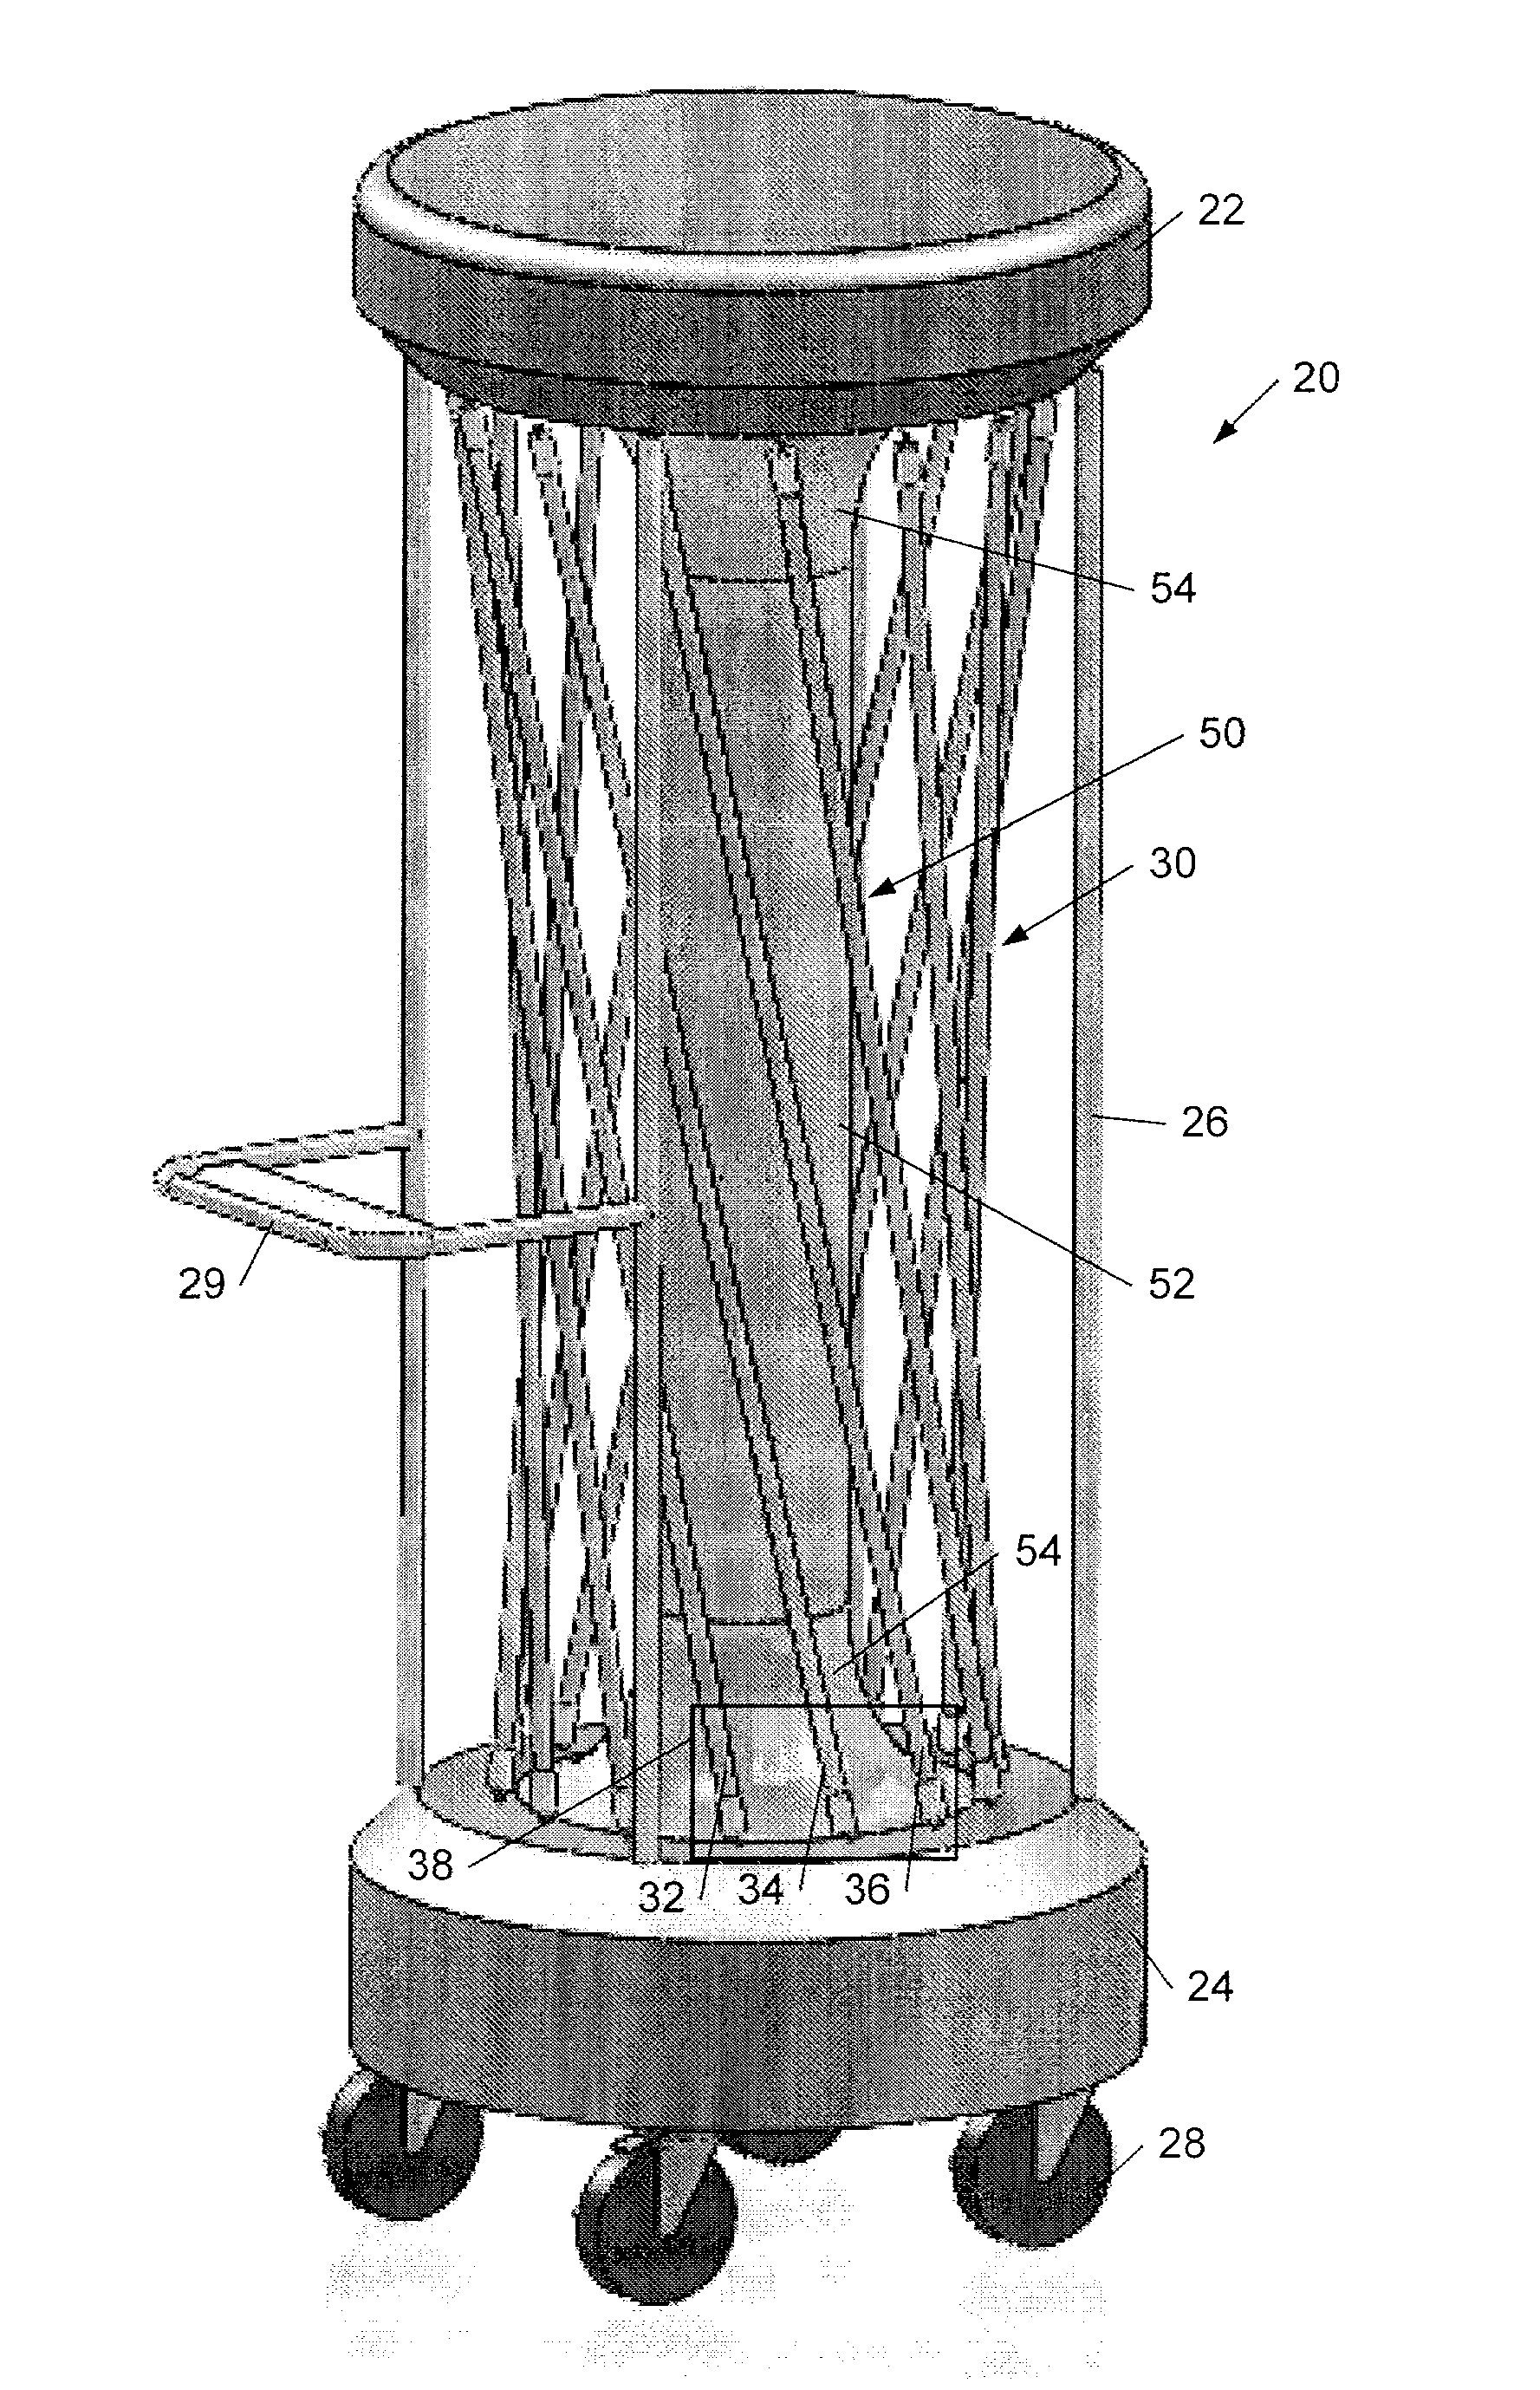 Lamp and Reflector Arrangements for Apparatuses with Multiple Germicidal Lamps